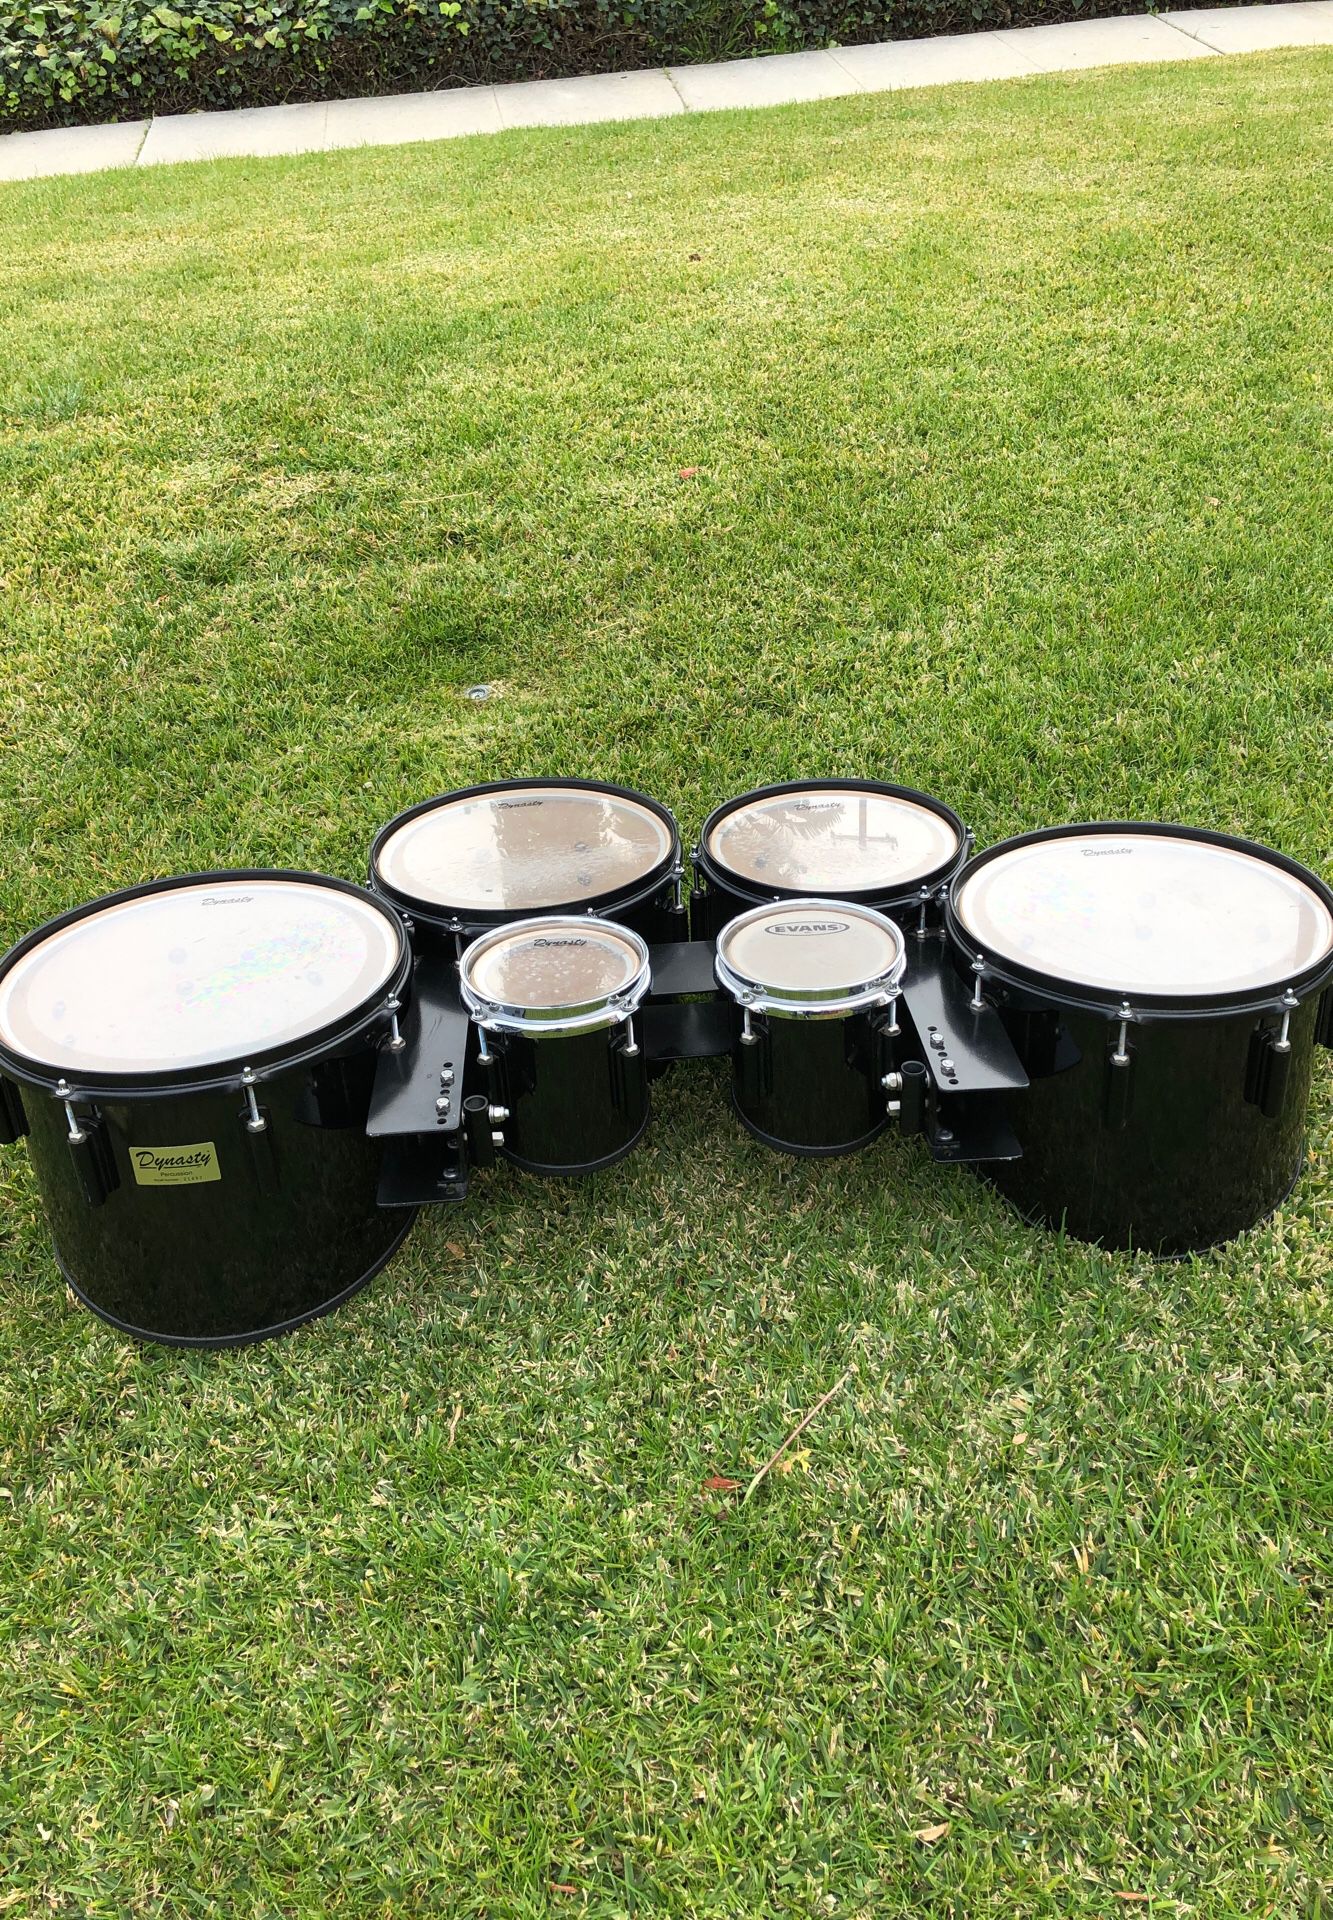 Dynasty Marching Tenor Drum For Sale In Los Angeles Ca Offerup